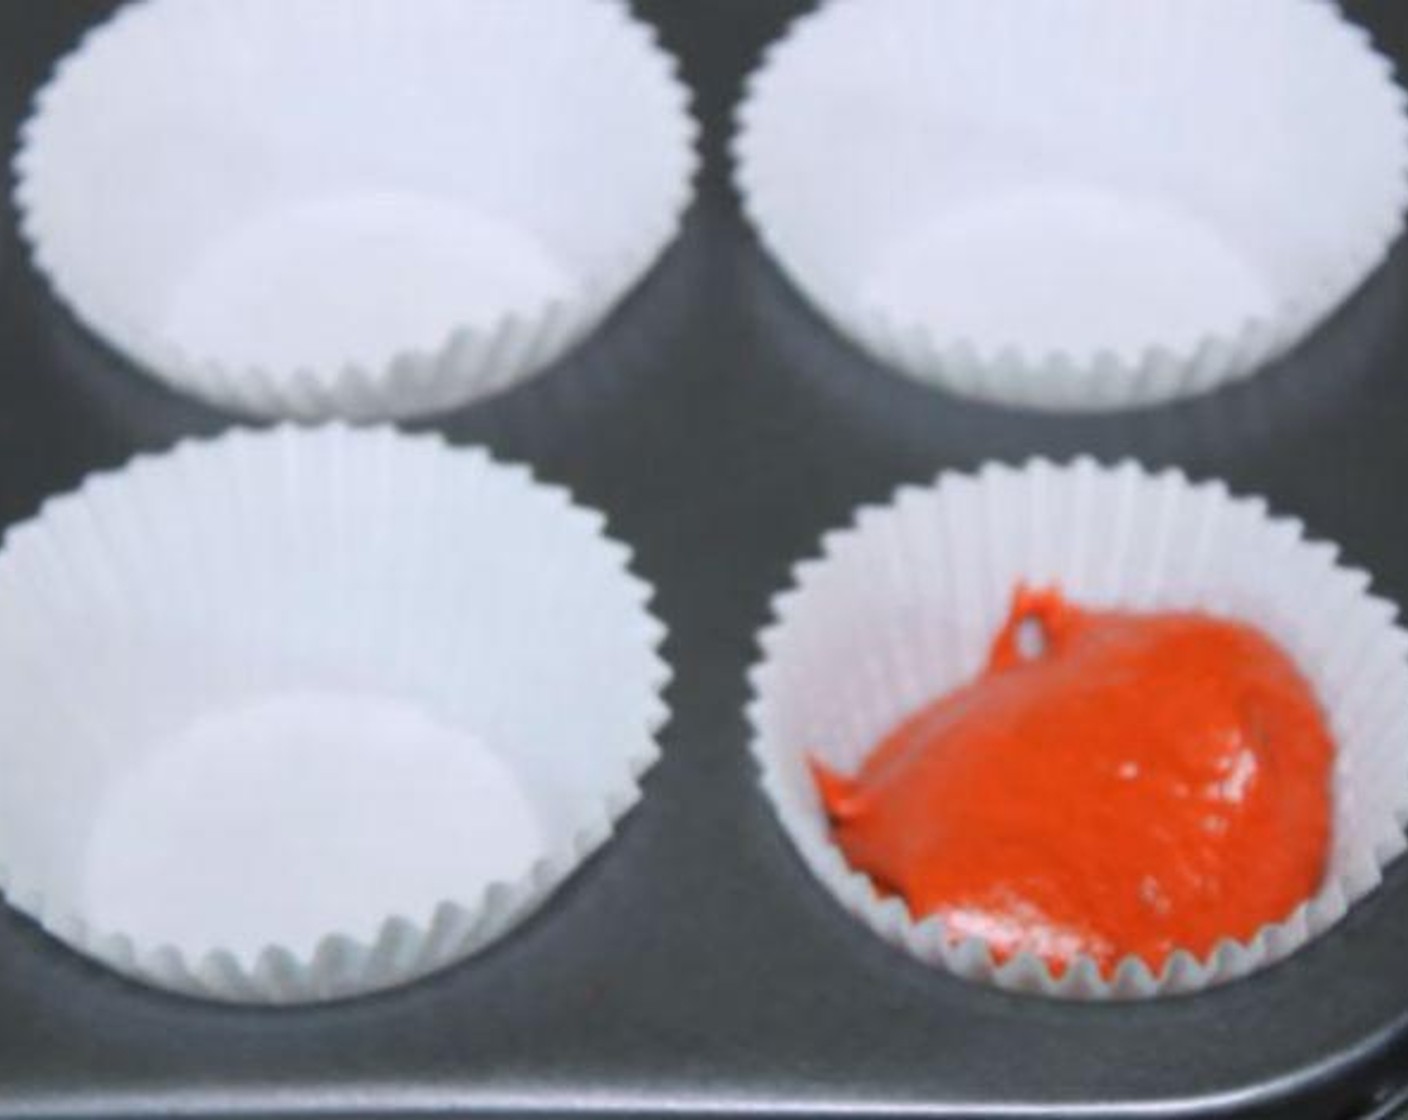 step 4 Pour the batter 2/3 up the cup of each muffin tin. Bake for 18 minutes at 350 degrees F (180 degrees C).